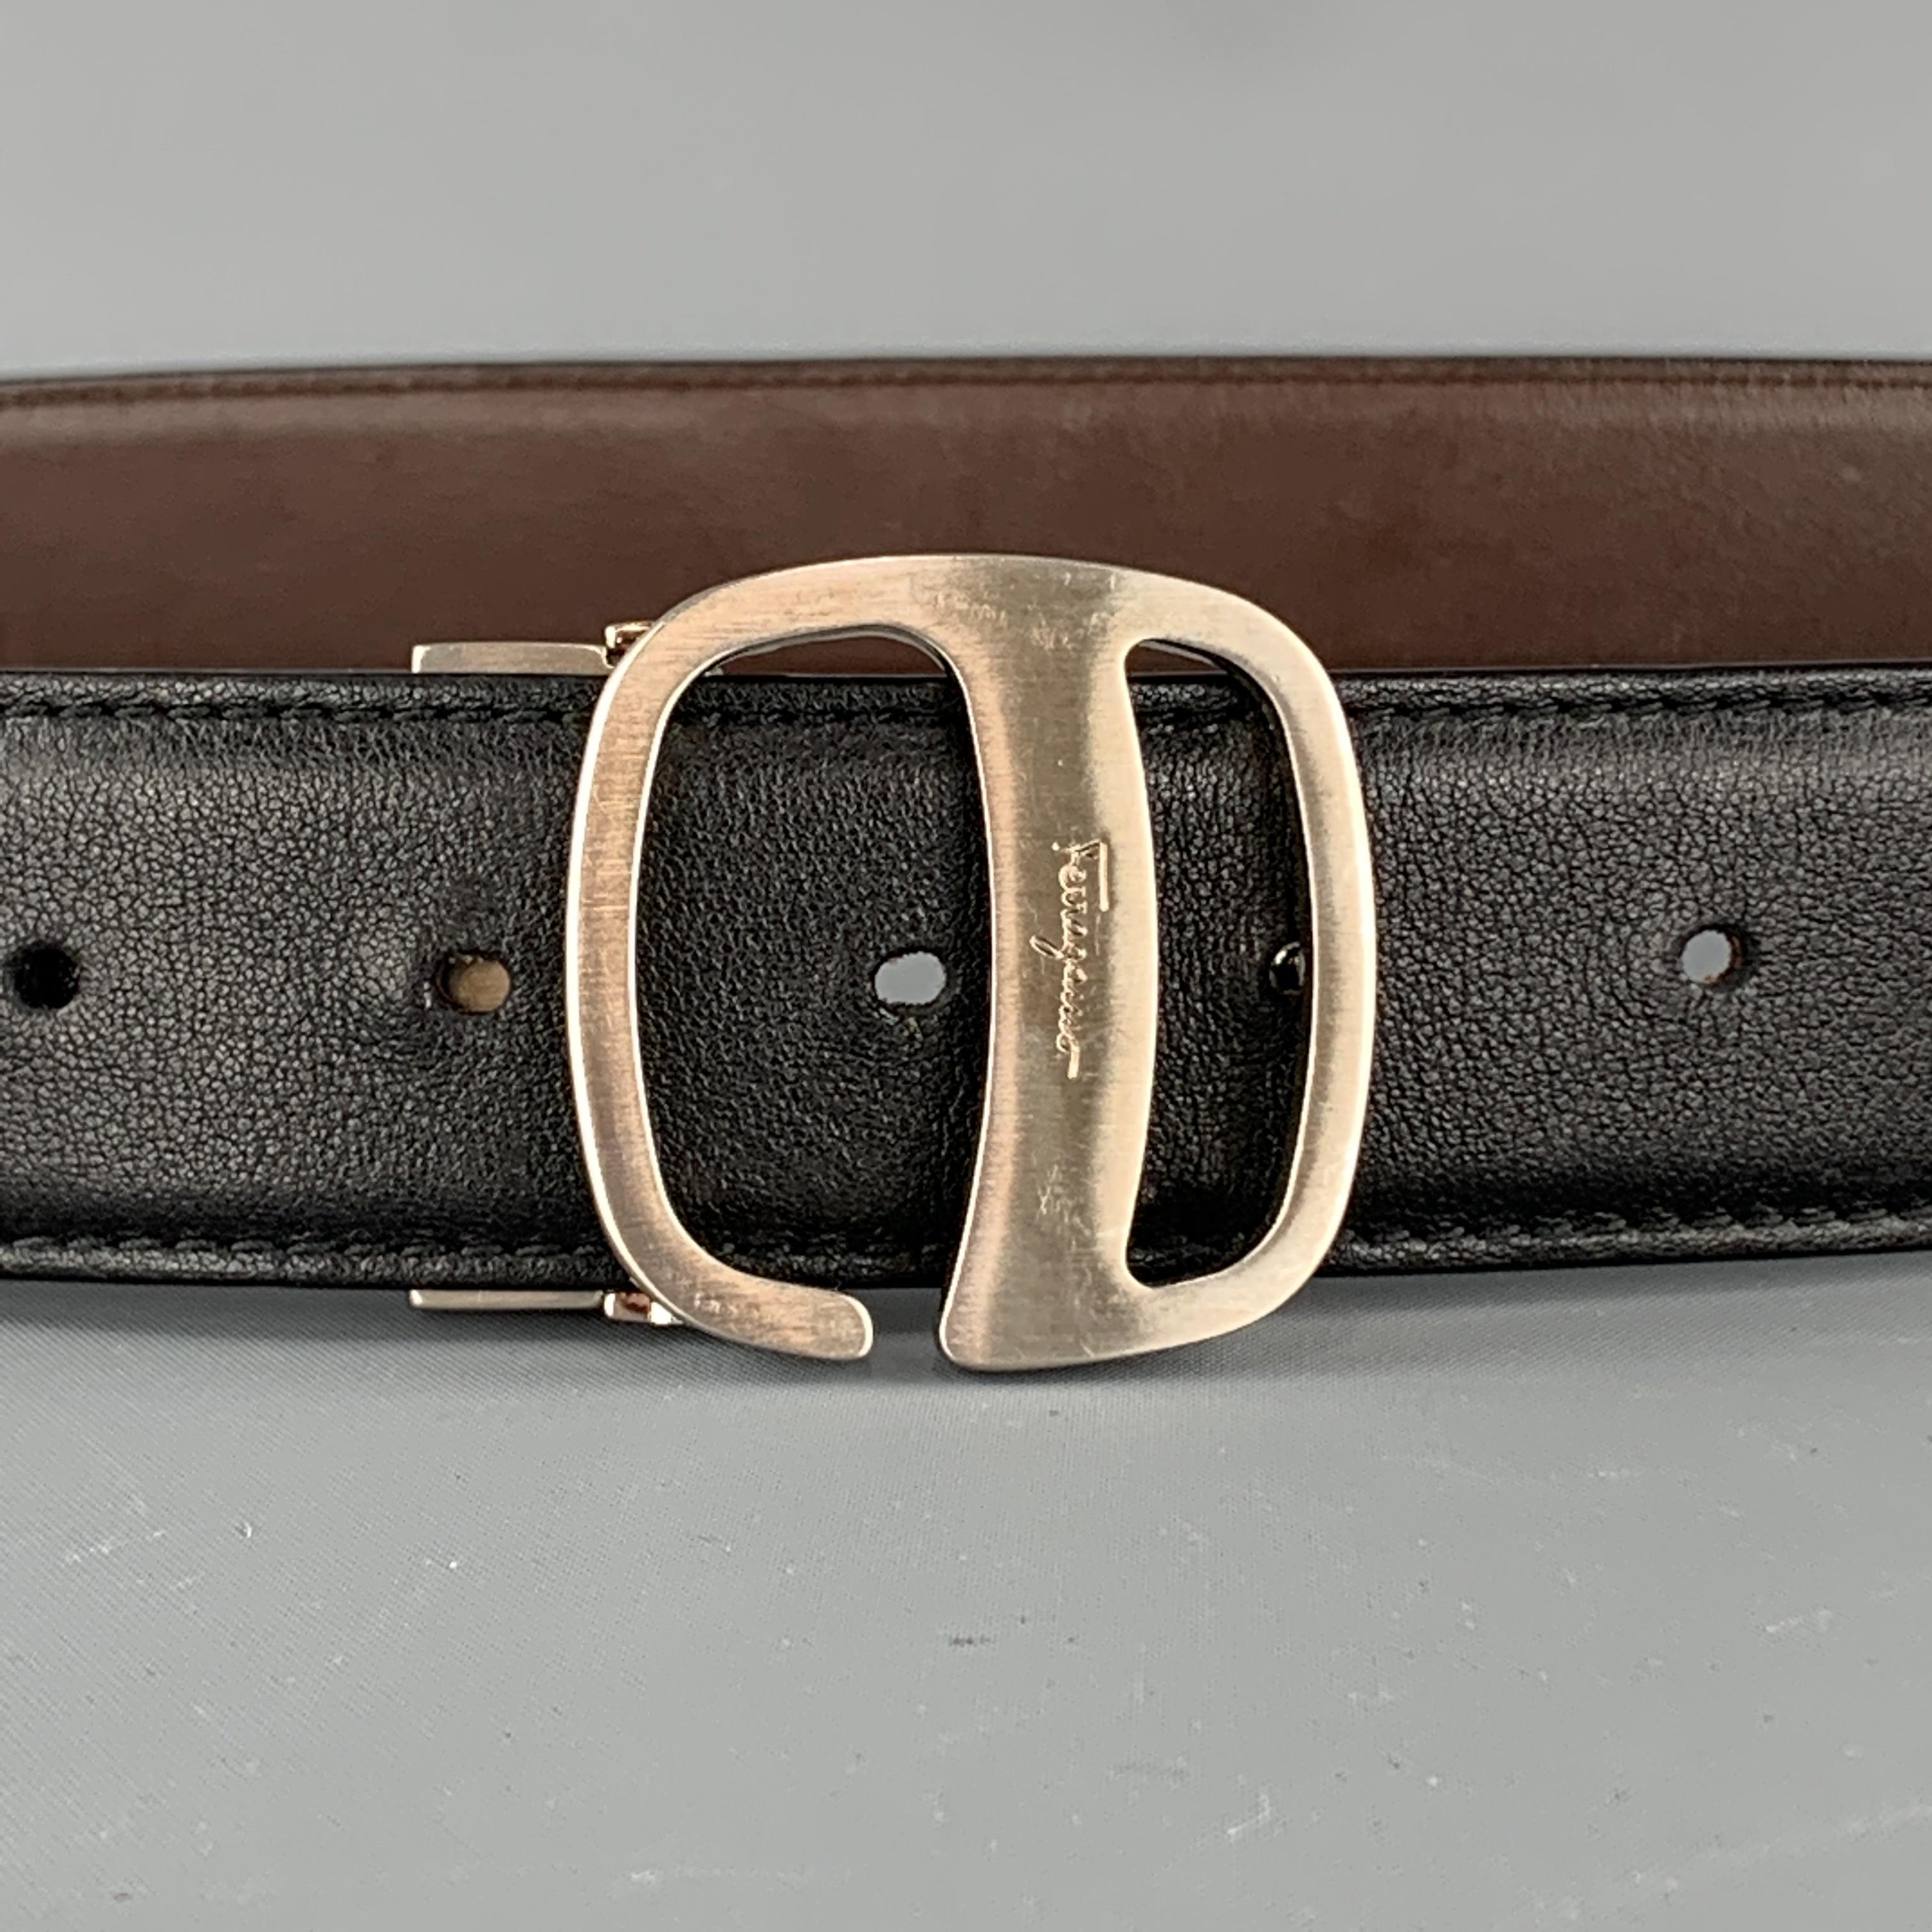 SALVATORE FERRAGAMO belt comes features a smooth black and brown reversible leather strap and a brushed silver tone buckle. Made in Italy.

Very Good Pre-Owned Condition.
Marked: (no size) 

Length: 38.5 in.
Width: 1.25 in.
Fits: 31 - 34.5 in.